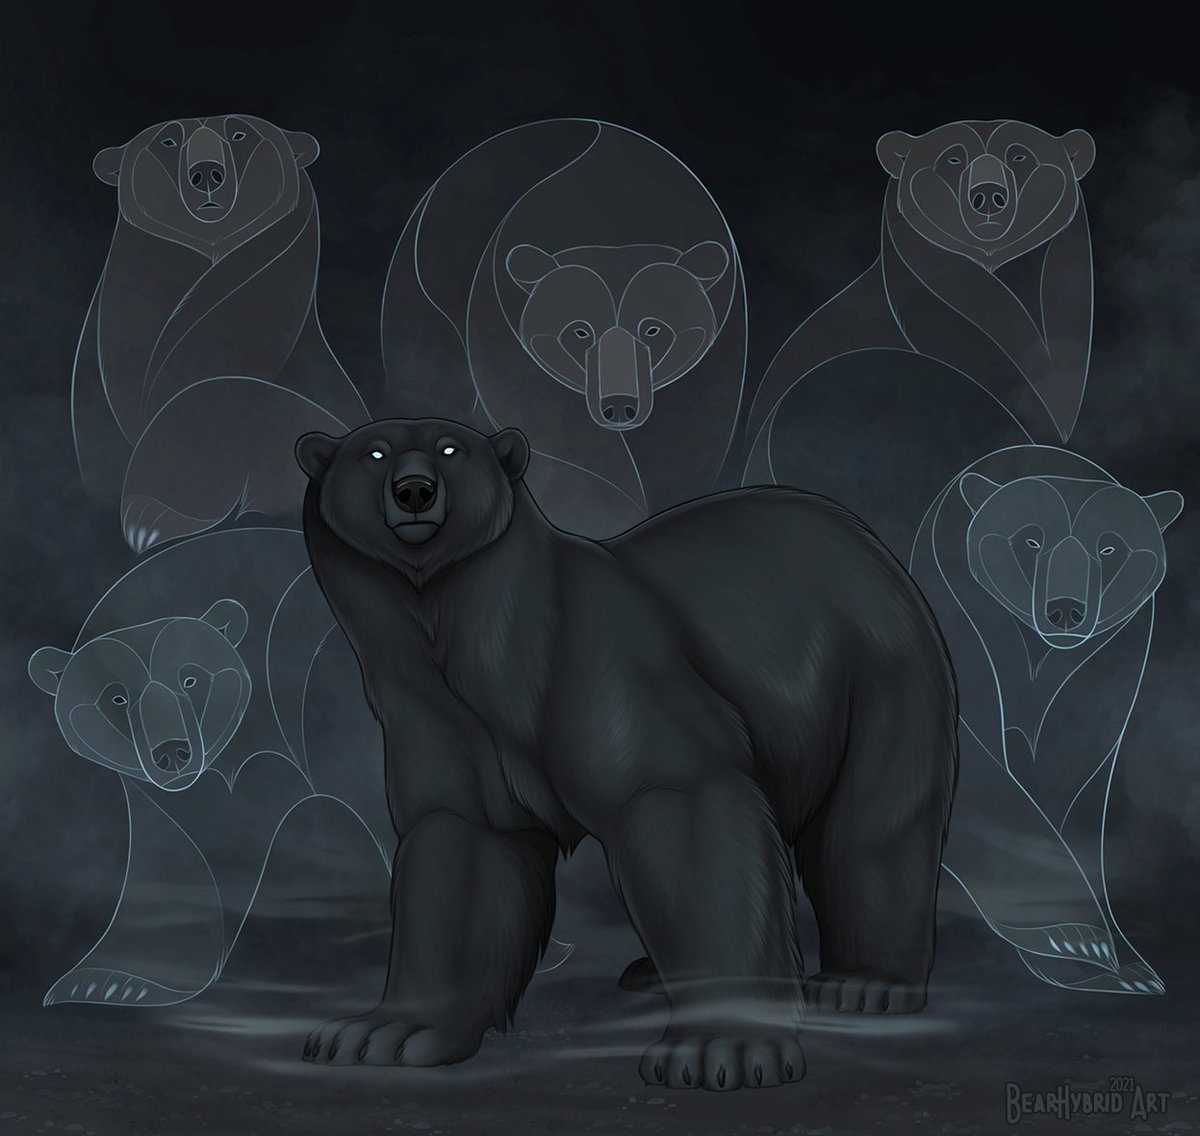 Happy #polarbearday 🐻‍❄️🖤 a dream I had of a black polar bear remains one of my most clearly remembered dreams even years later!